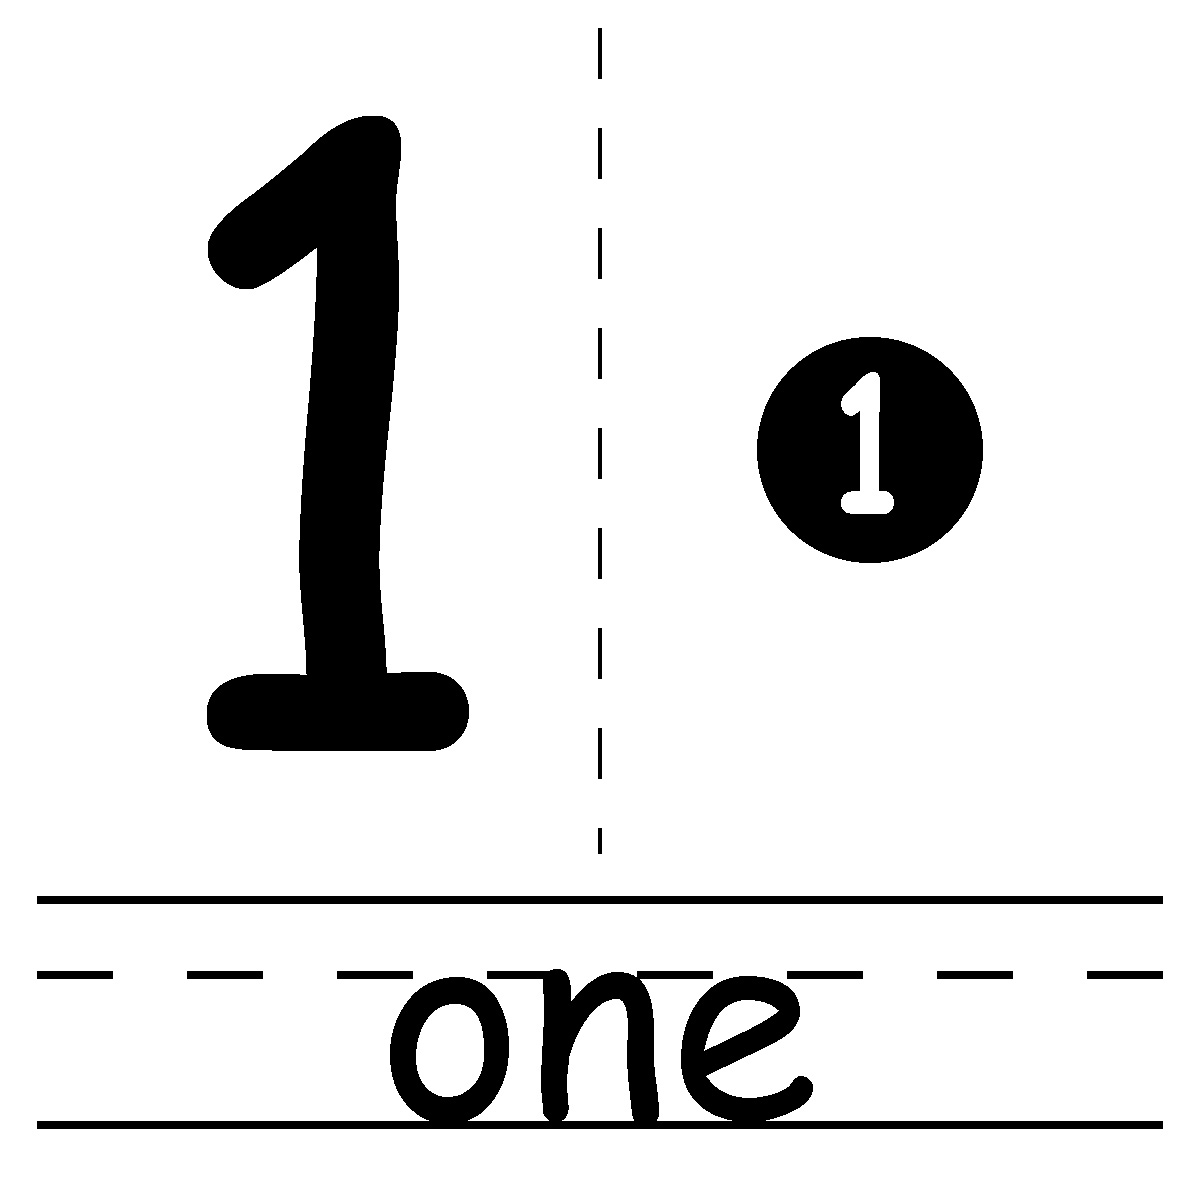 Number One Black And White   Clipart Panda   Free Clipart Images